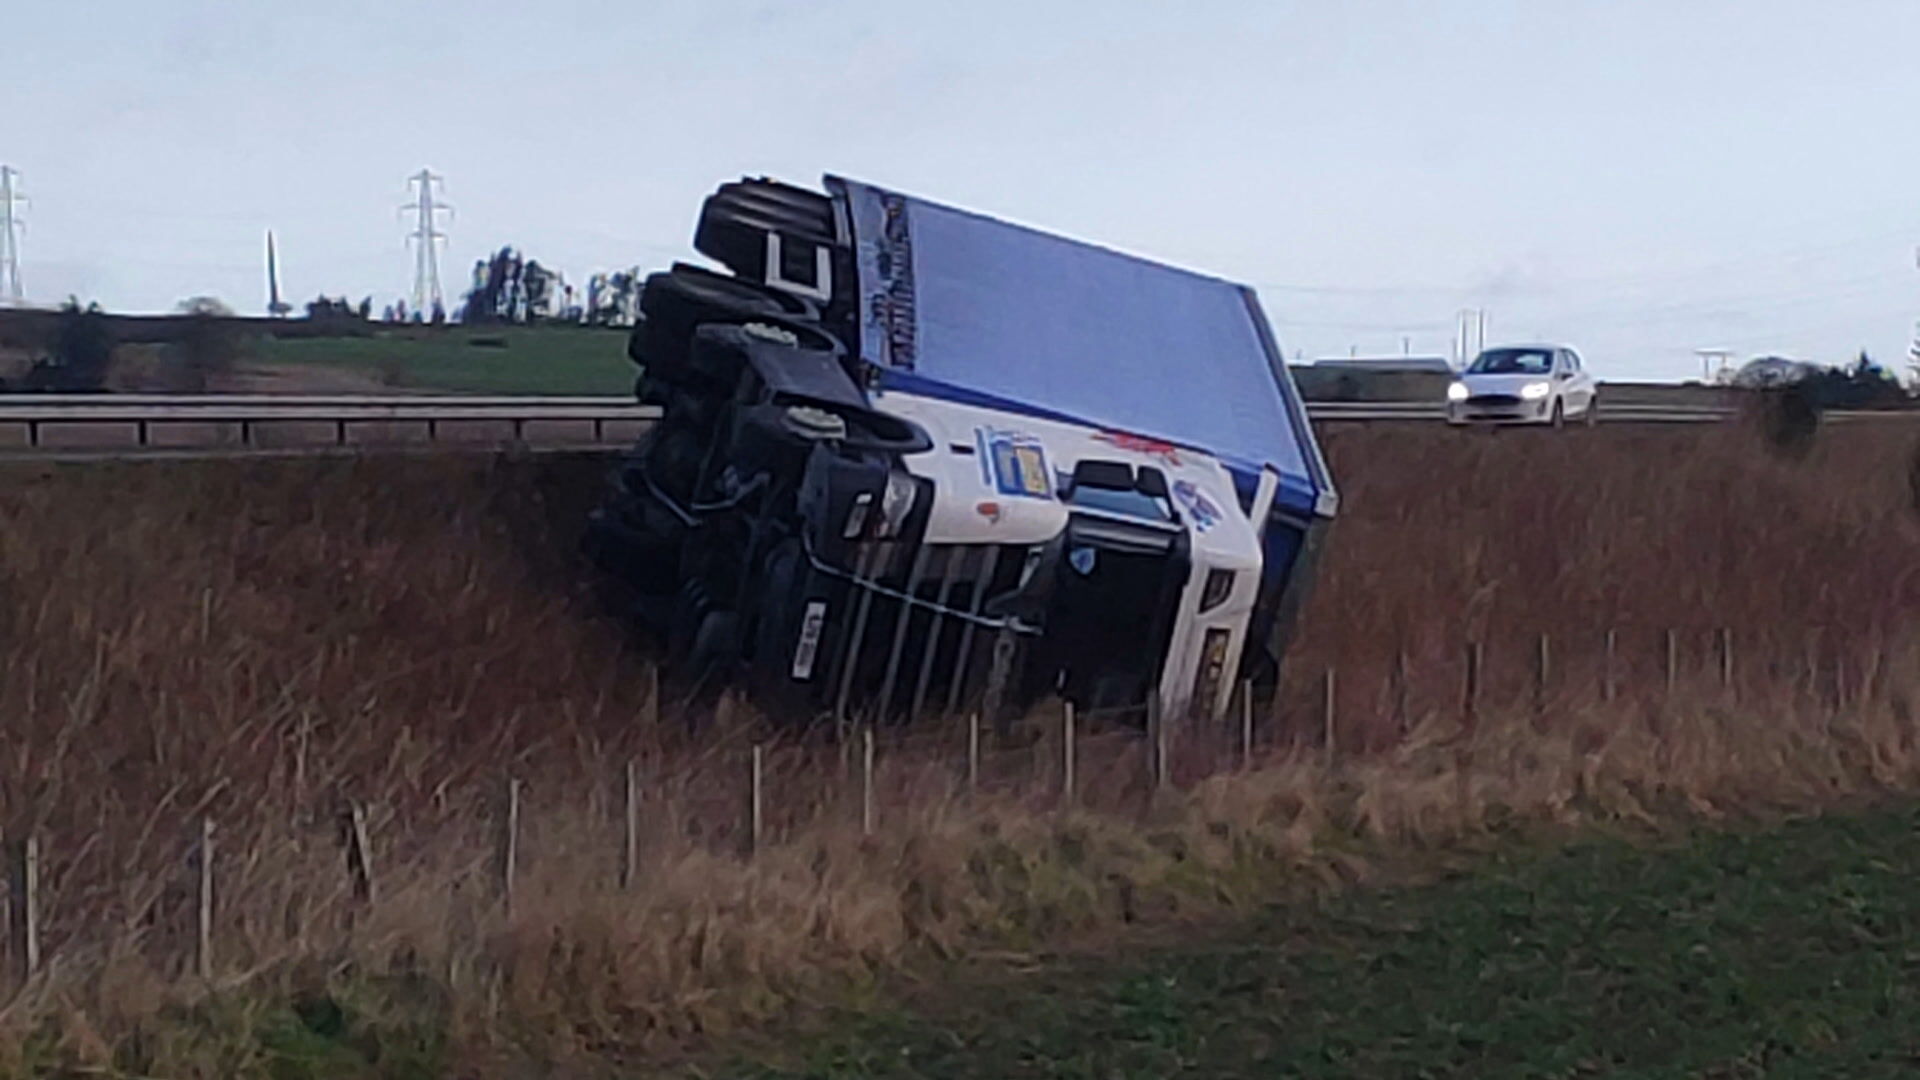 Lorry overturned near Stonehaven.